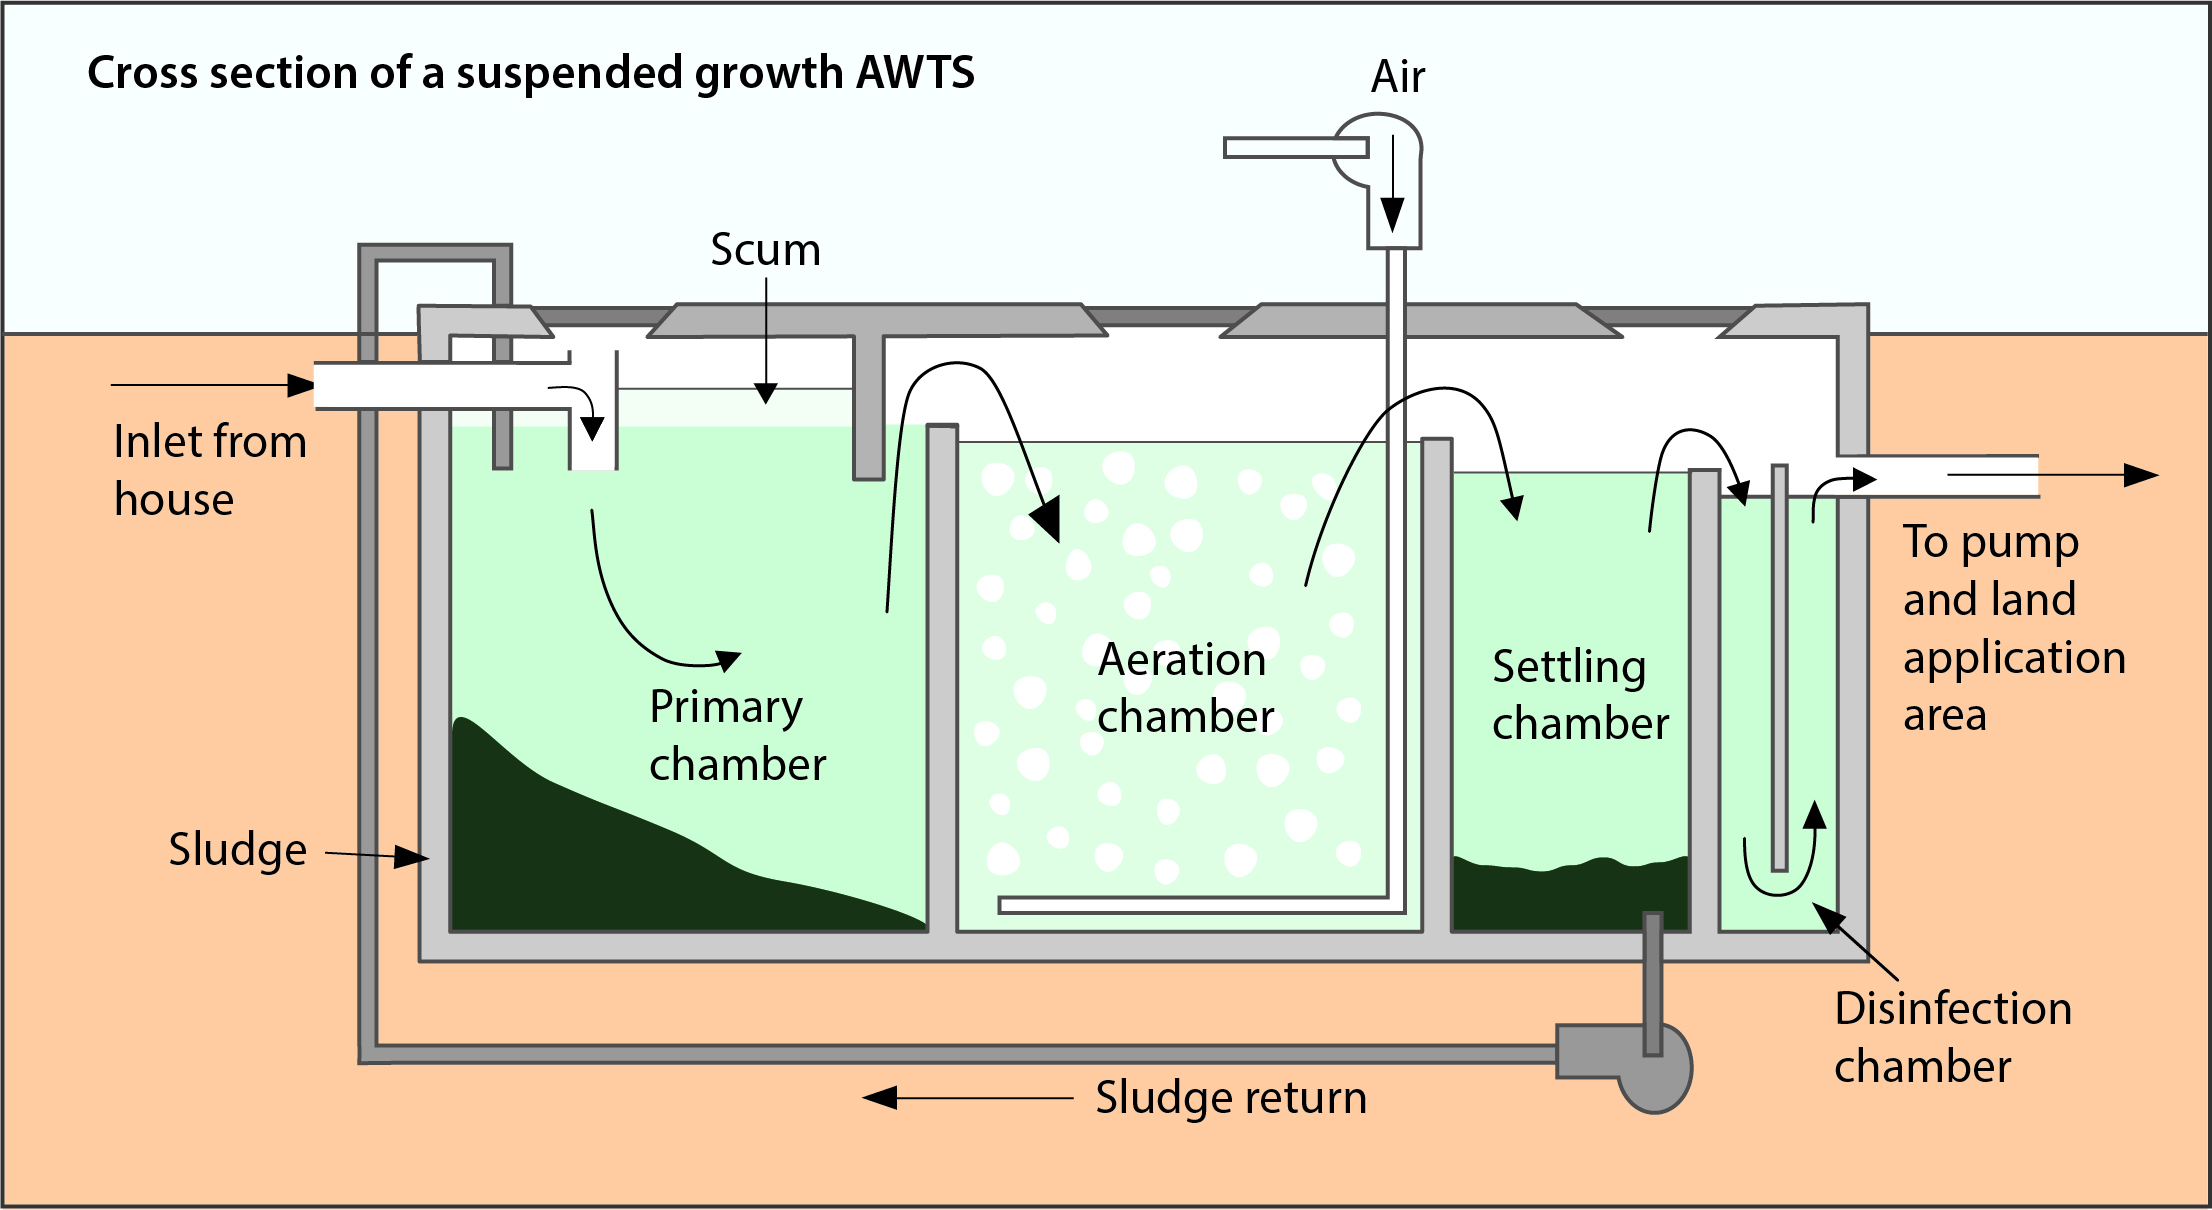 Cross section of an aerated waste water tank